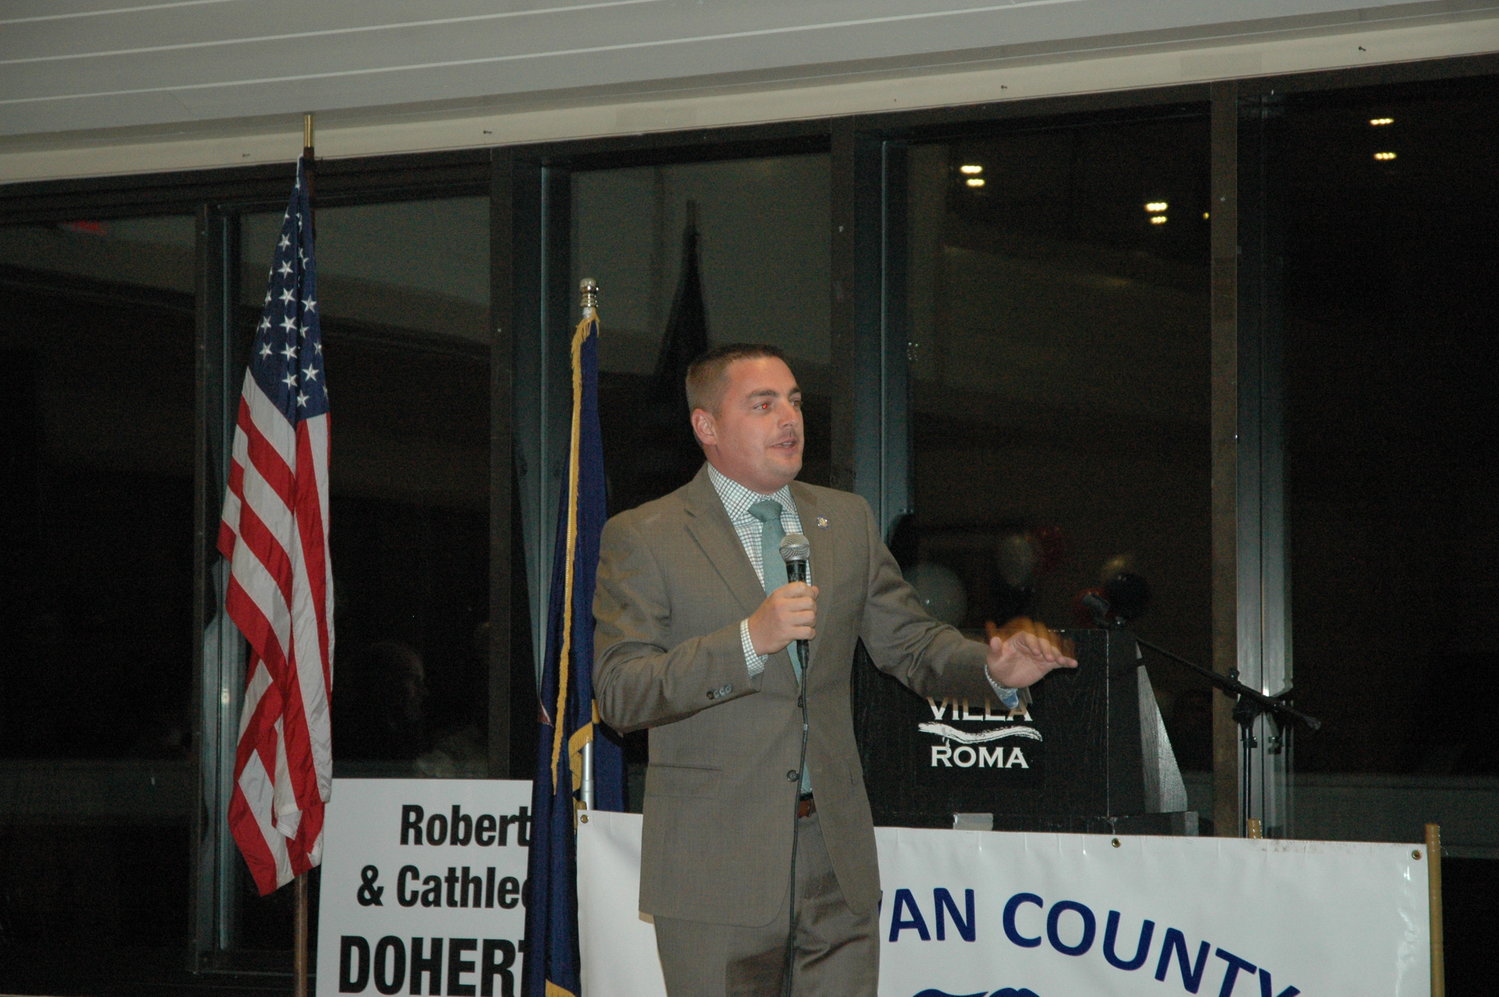 New York’s 42nd Senate District representative Senator Mike Martucci gave his farewell speech to fellow Sullivan County Republican Committee members at their annual dinner at the Villa Roma Resort on October 14.